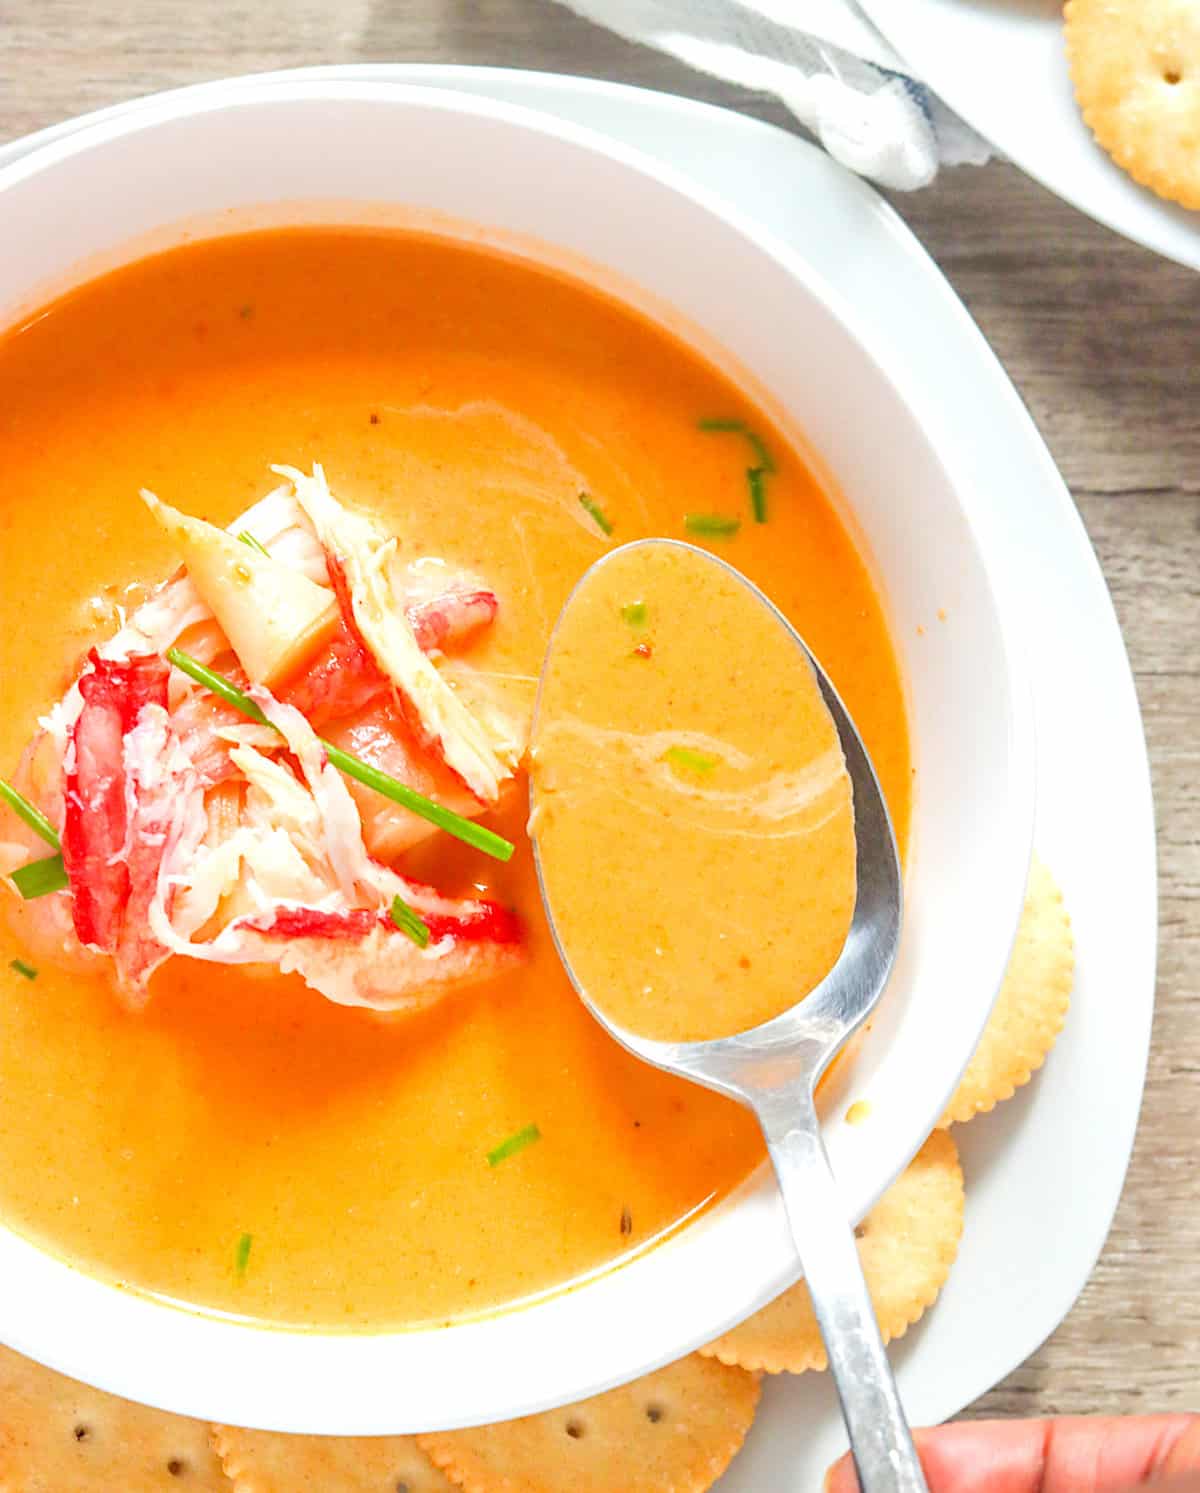 Stuff a spoon with delicious creamy crab bisque